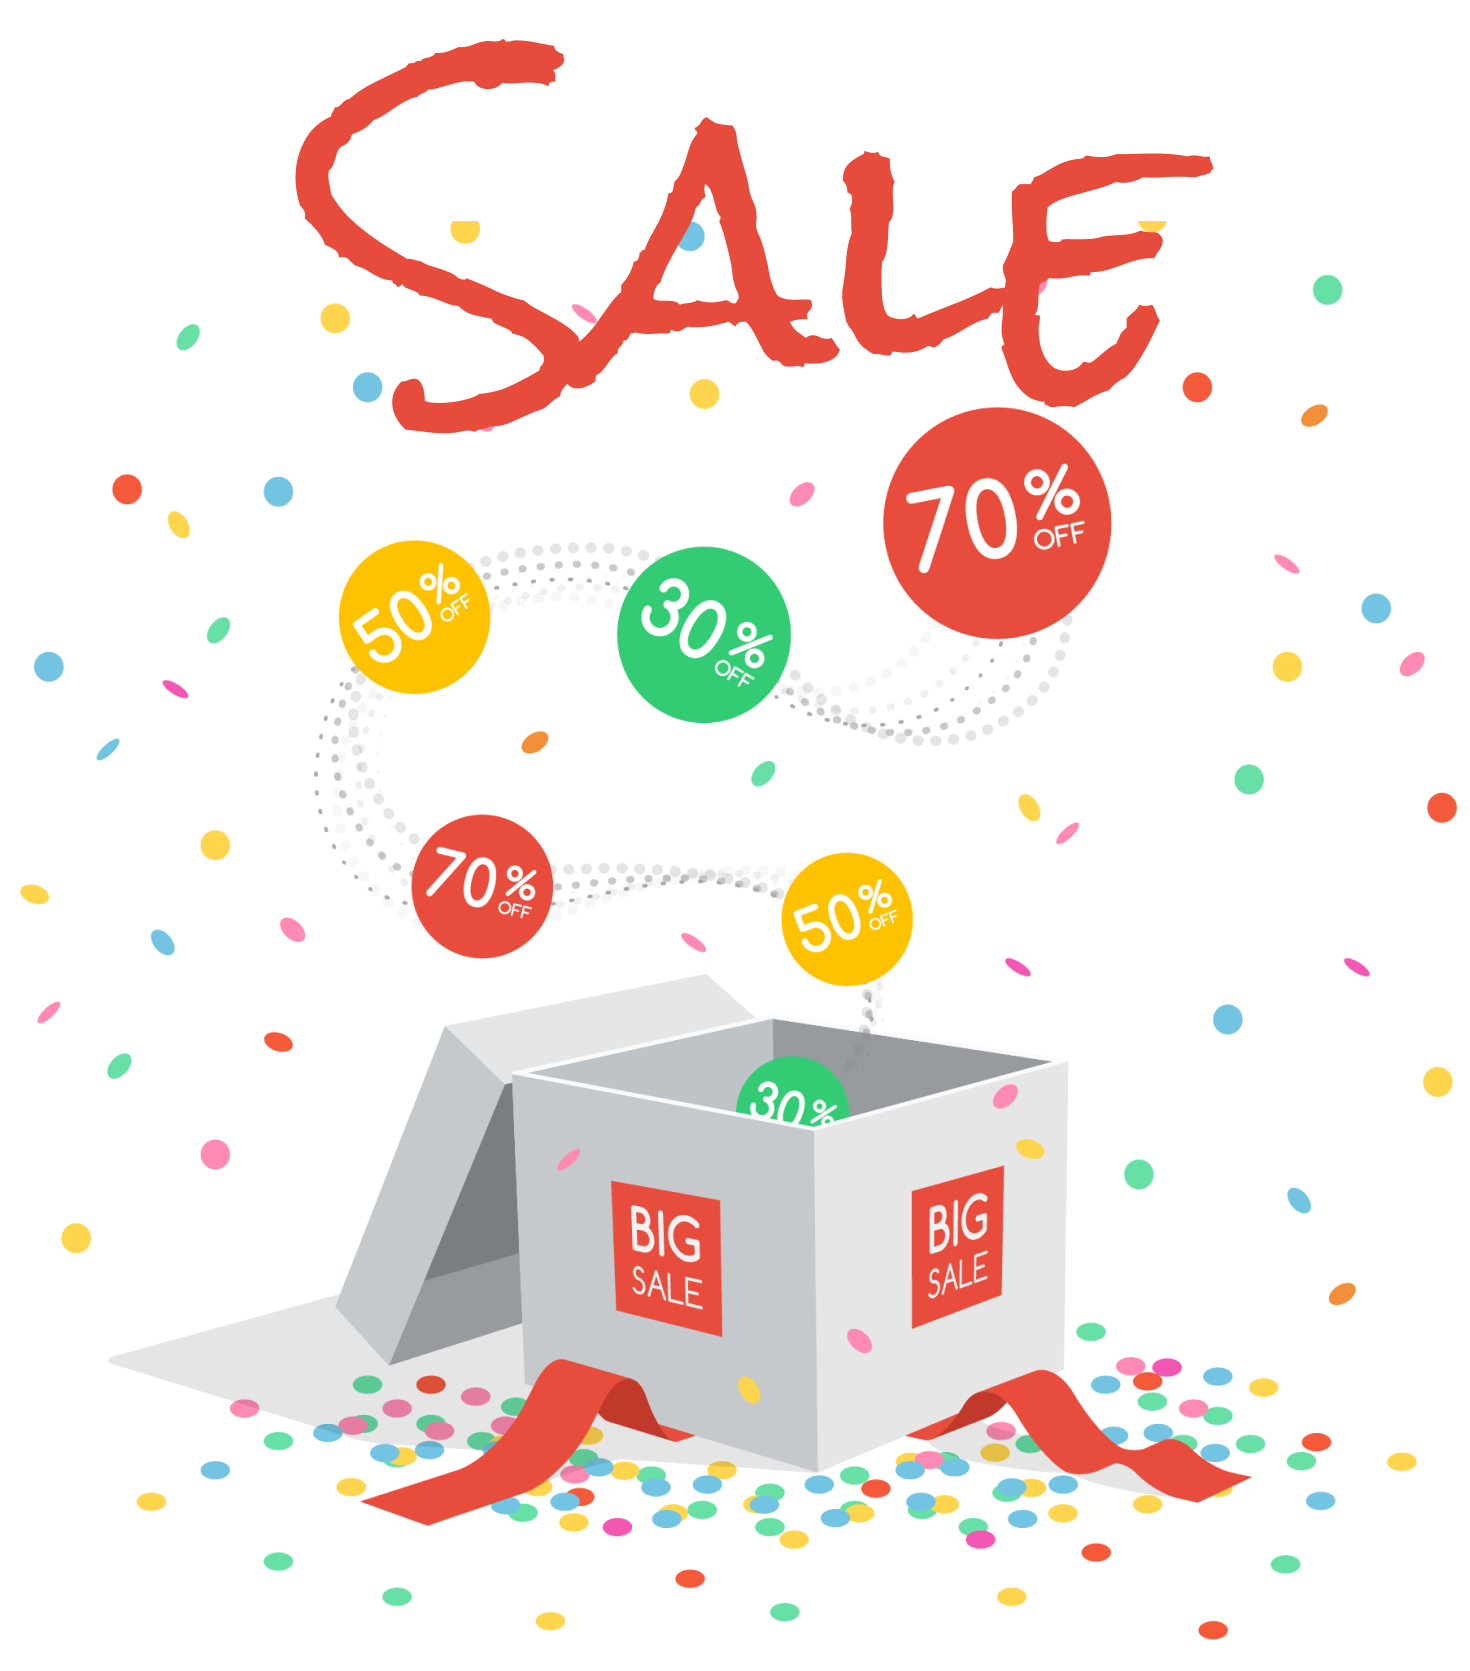 SALE. 70% OFF, 50% OFF, 30% OFF.